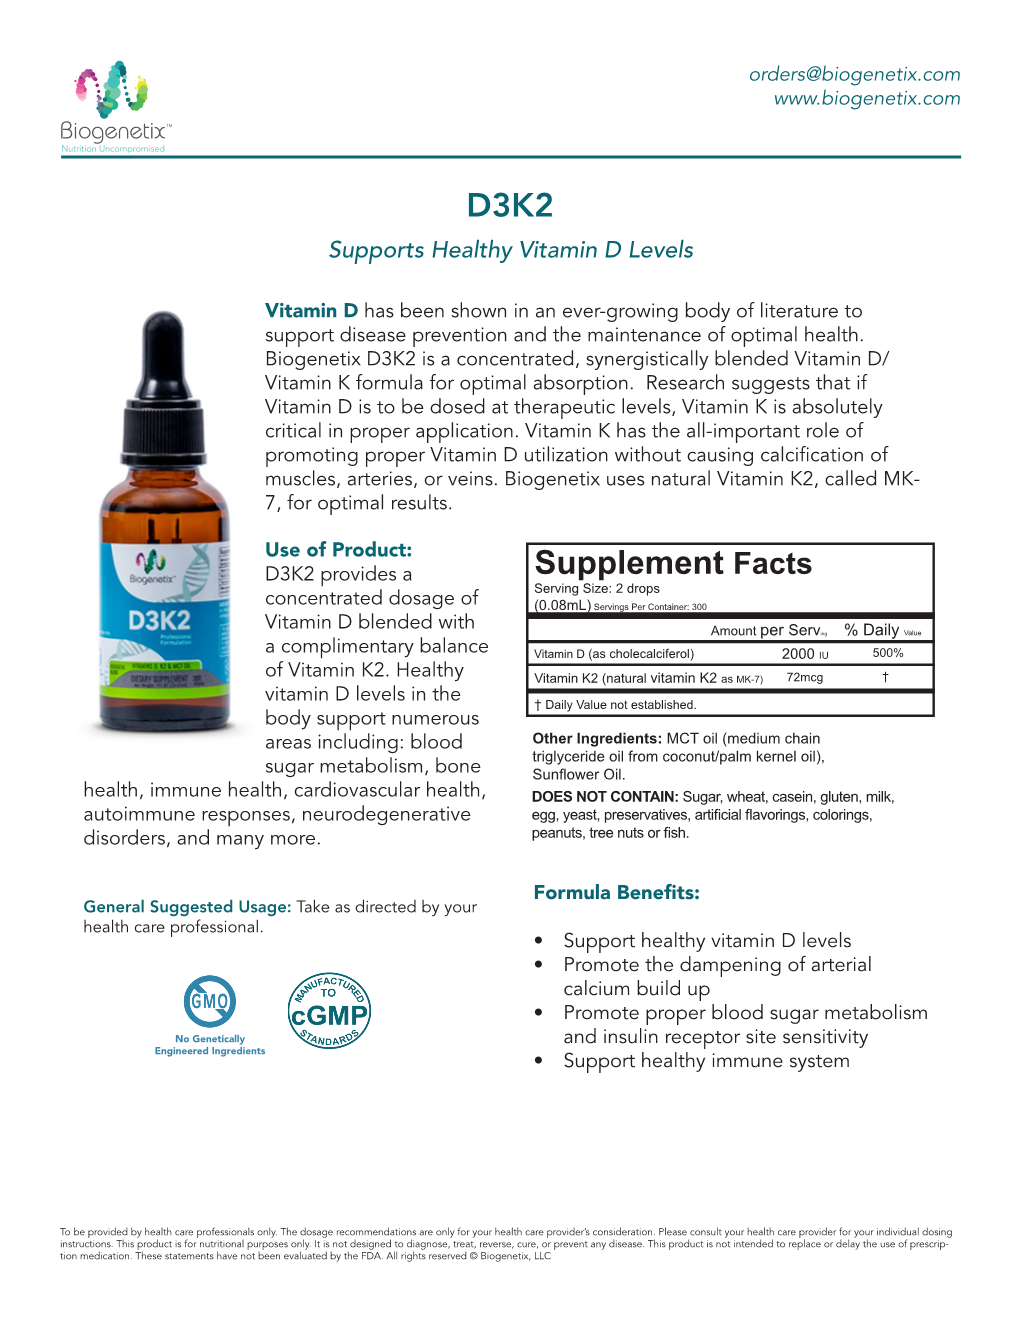 D3K2 Supports Healthy Vitamin D Levels